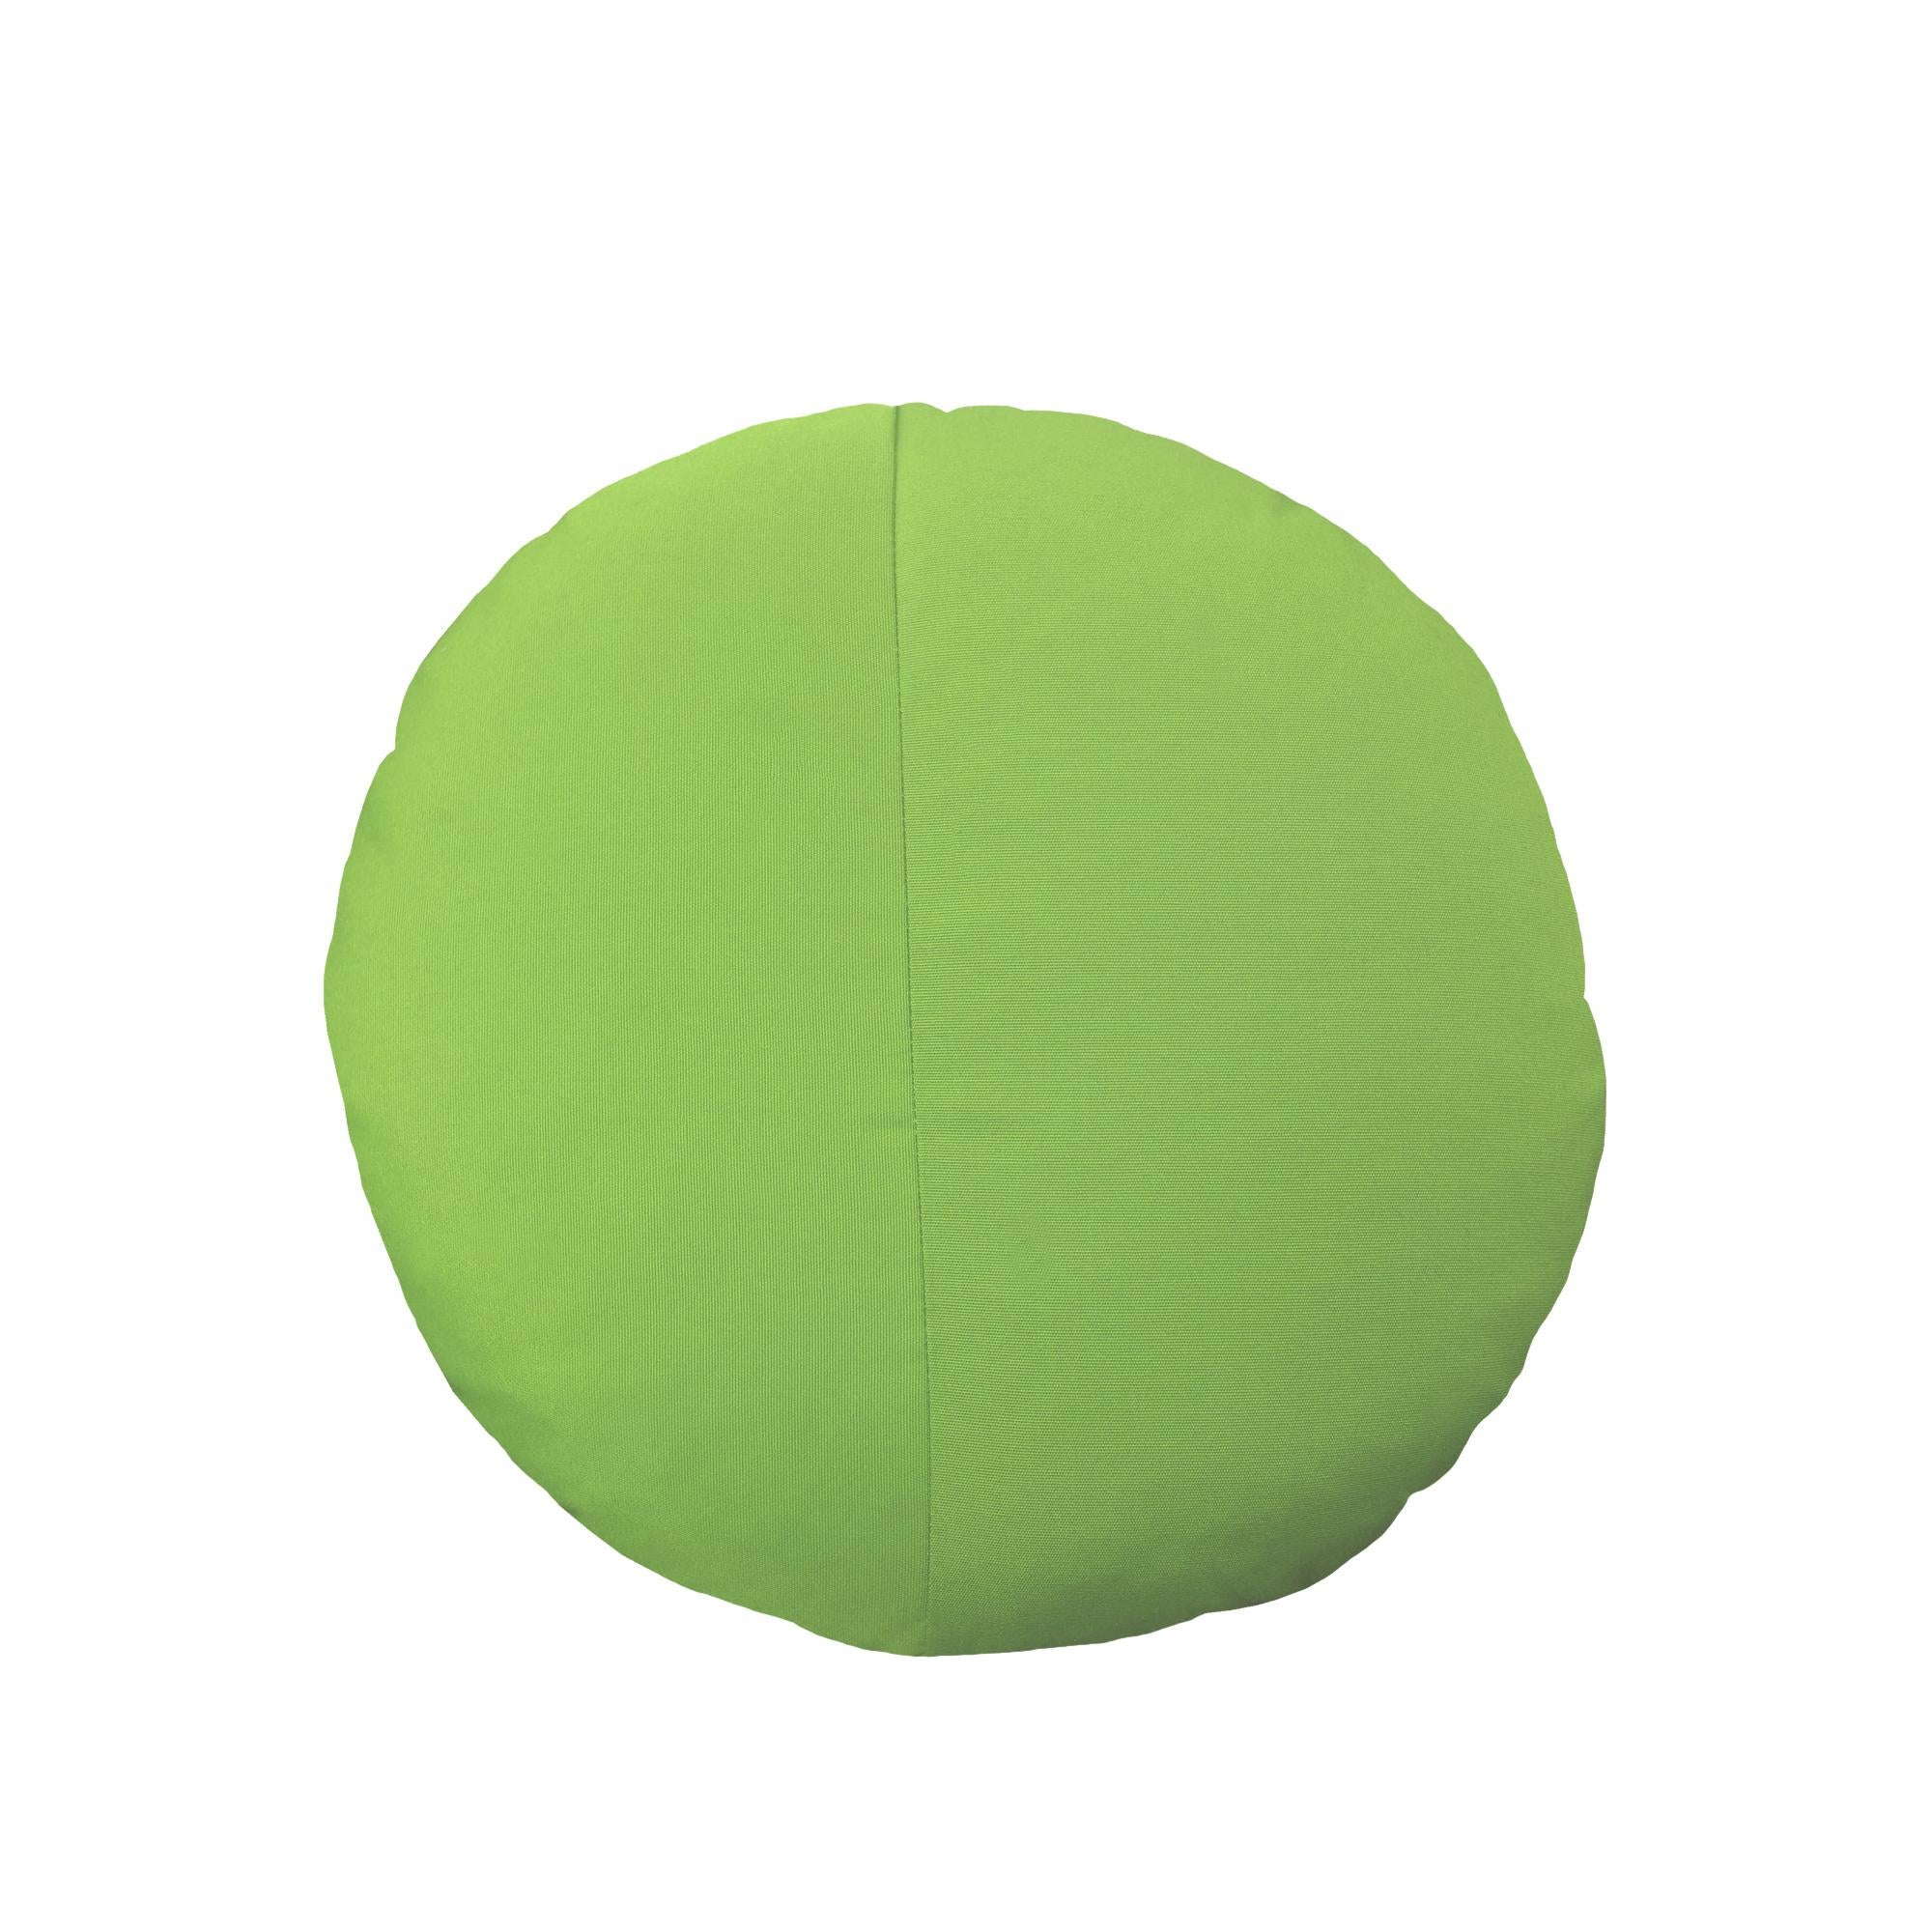 Bend Goods - Round Throw Pillow in Forest Green Sunbrella In New Condition For Sale In Ontario, CA